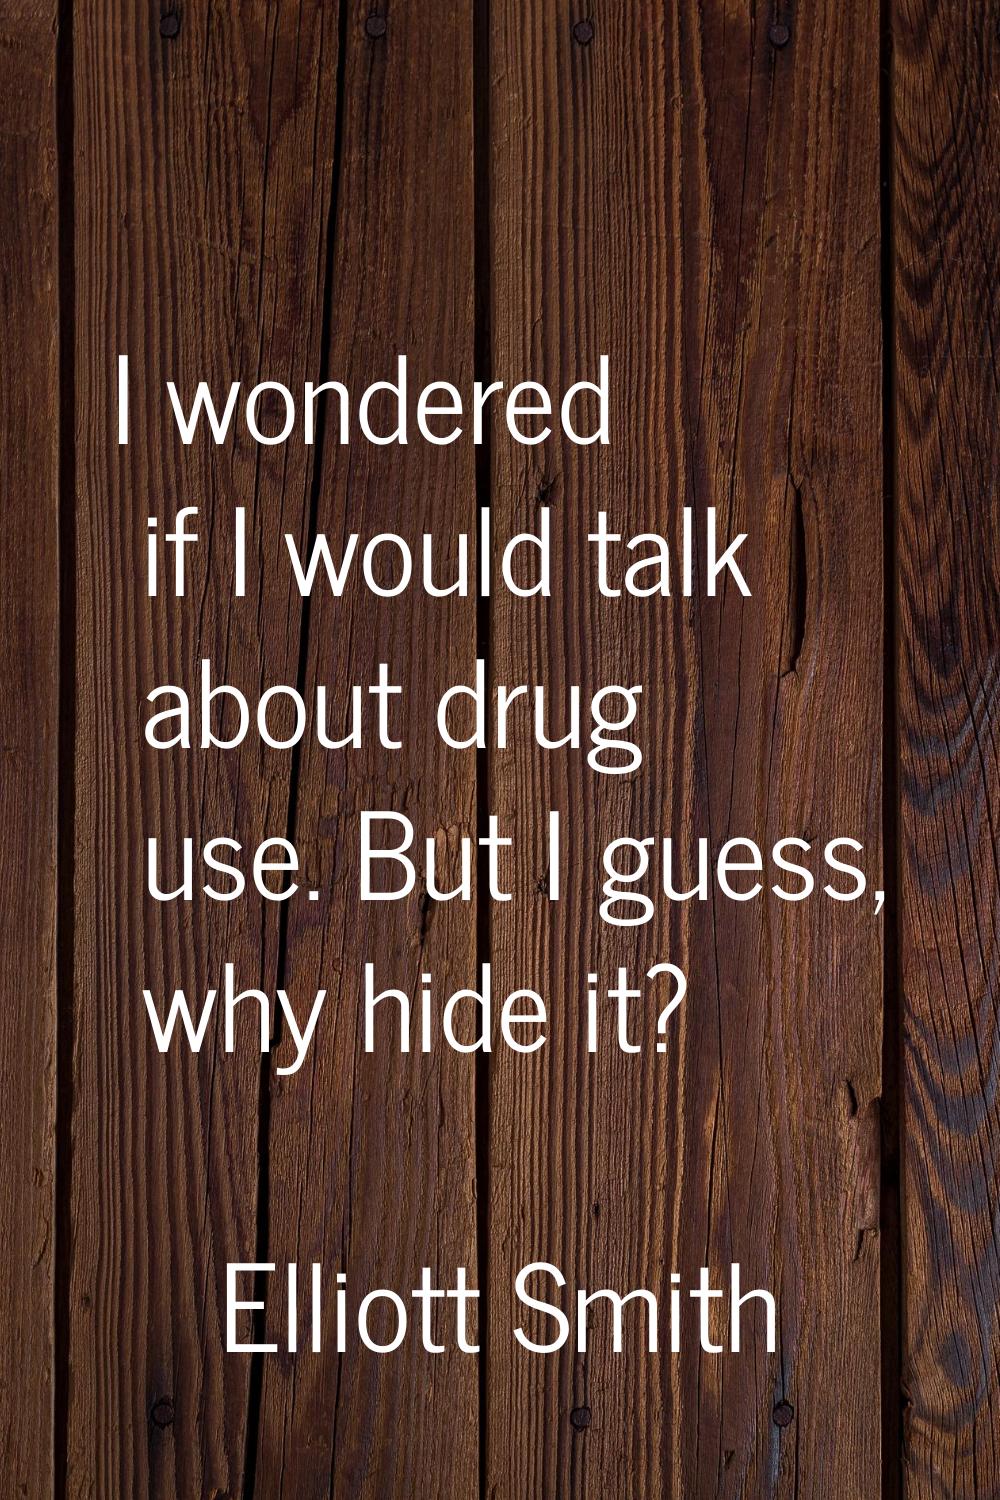 I wondered if I would talk about drug use. But I guess, why hide it?